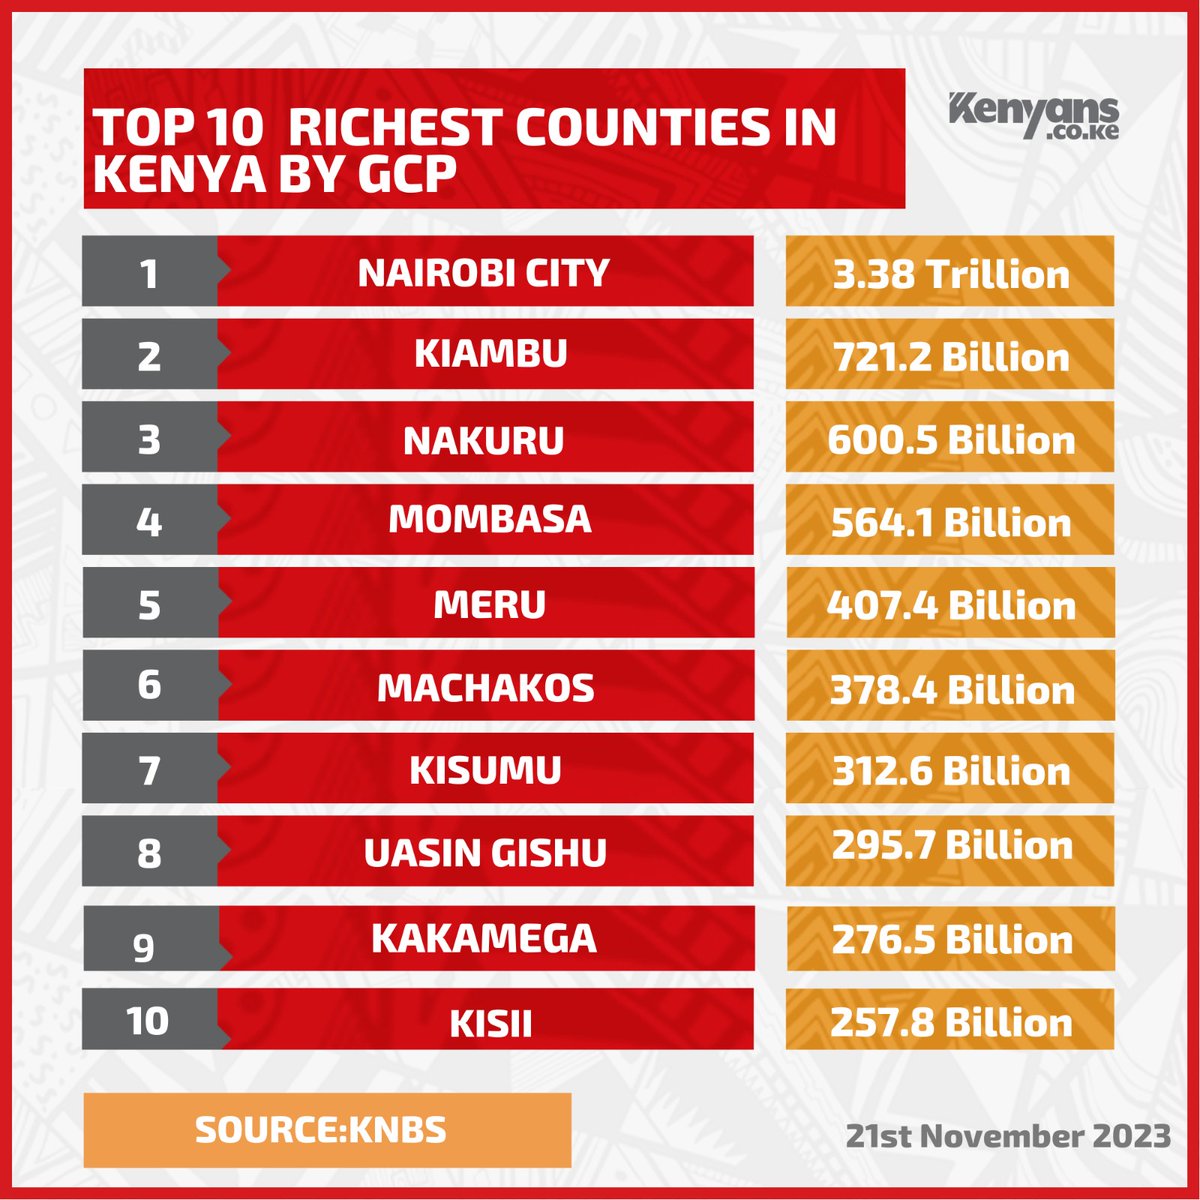 Super proud of my county Meru.
1. doesn't have a city like the rest of the top 5
2. is not part of the nairobi metropolitan,
3. has no manufacturing industry. 
Just pure hardwork of its people. Ask mama mboga where they get their produce and appreciate Meru County #KenyansData